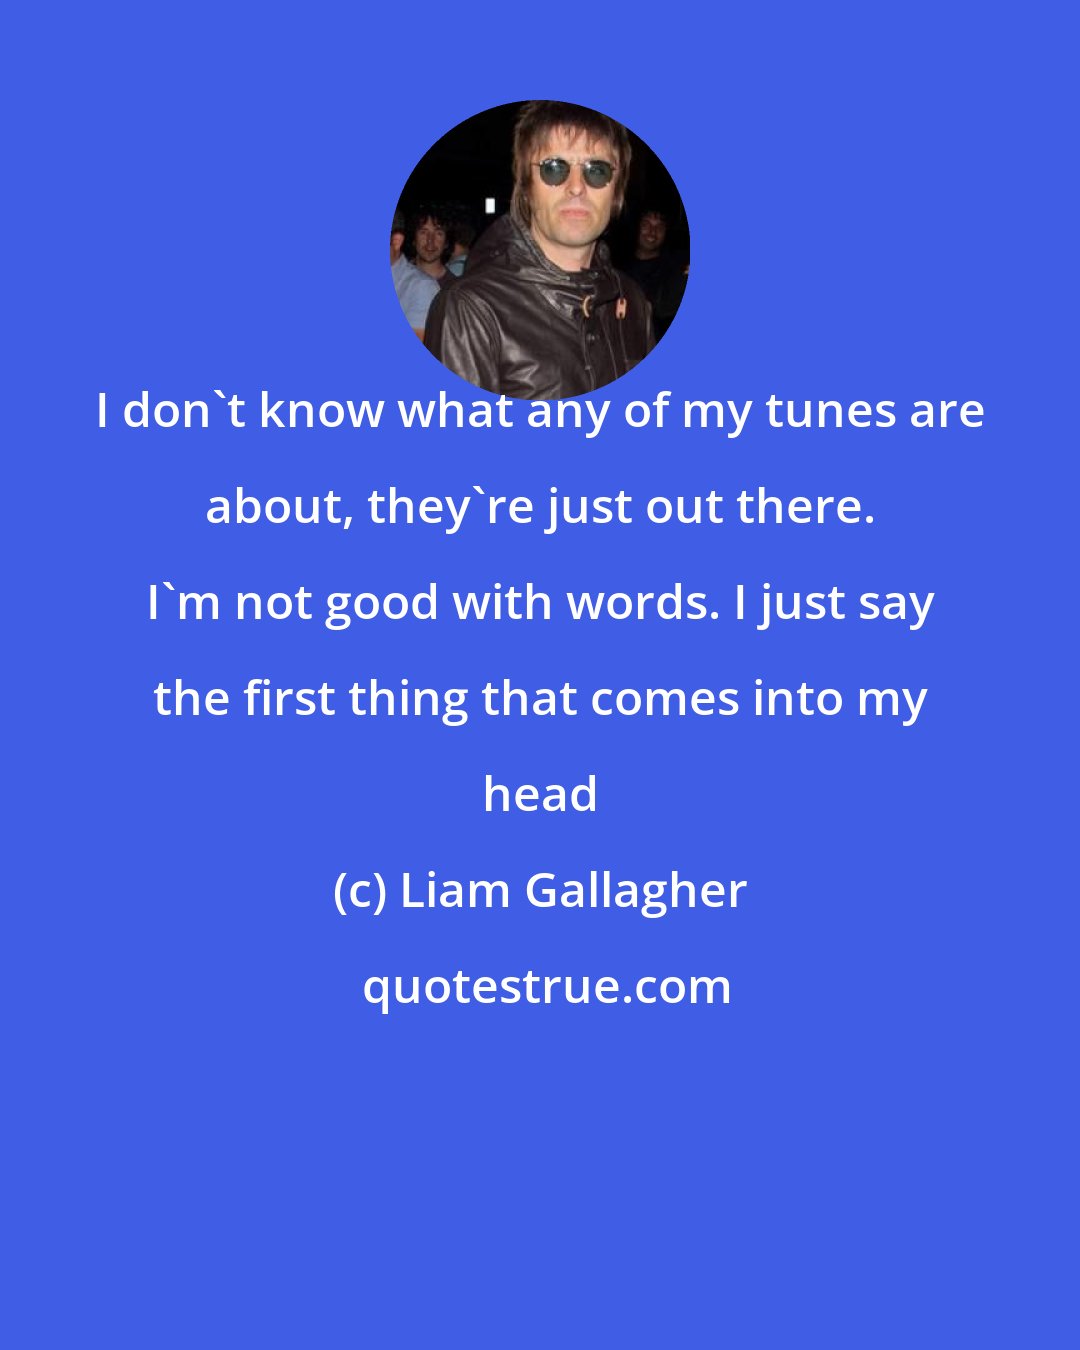 Liam Gallagher: I don't know what any of my tunes are about, they're just out there. I'm not good with words. I just say the first thing that comes into my head